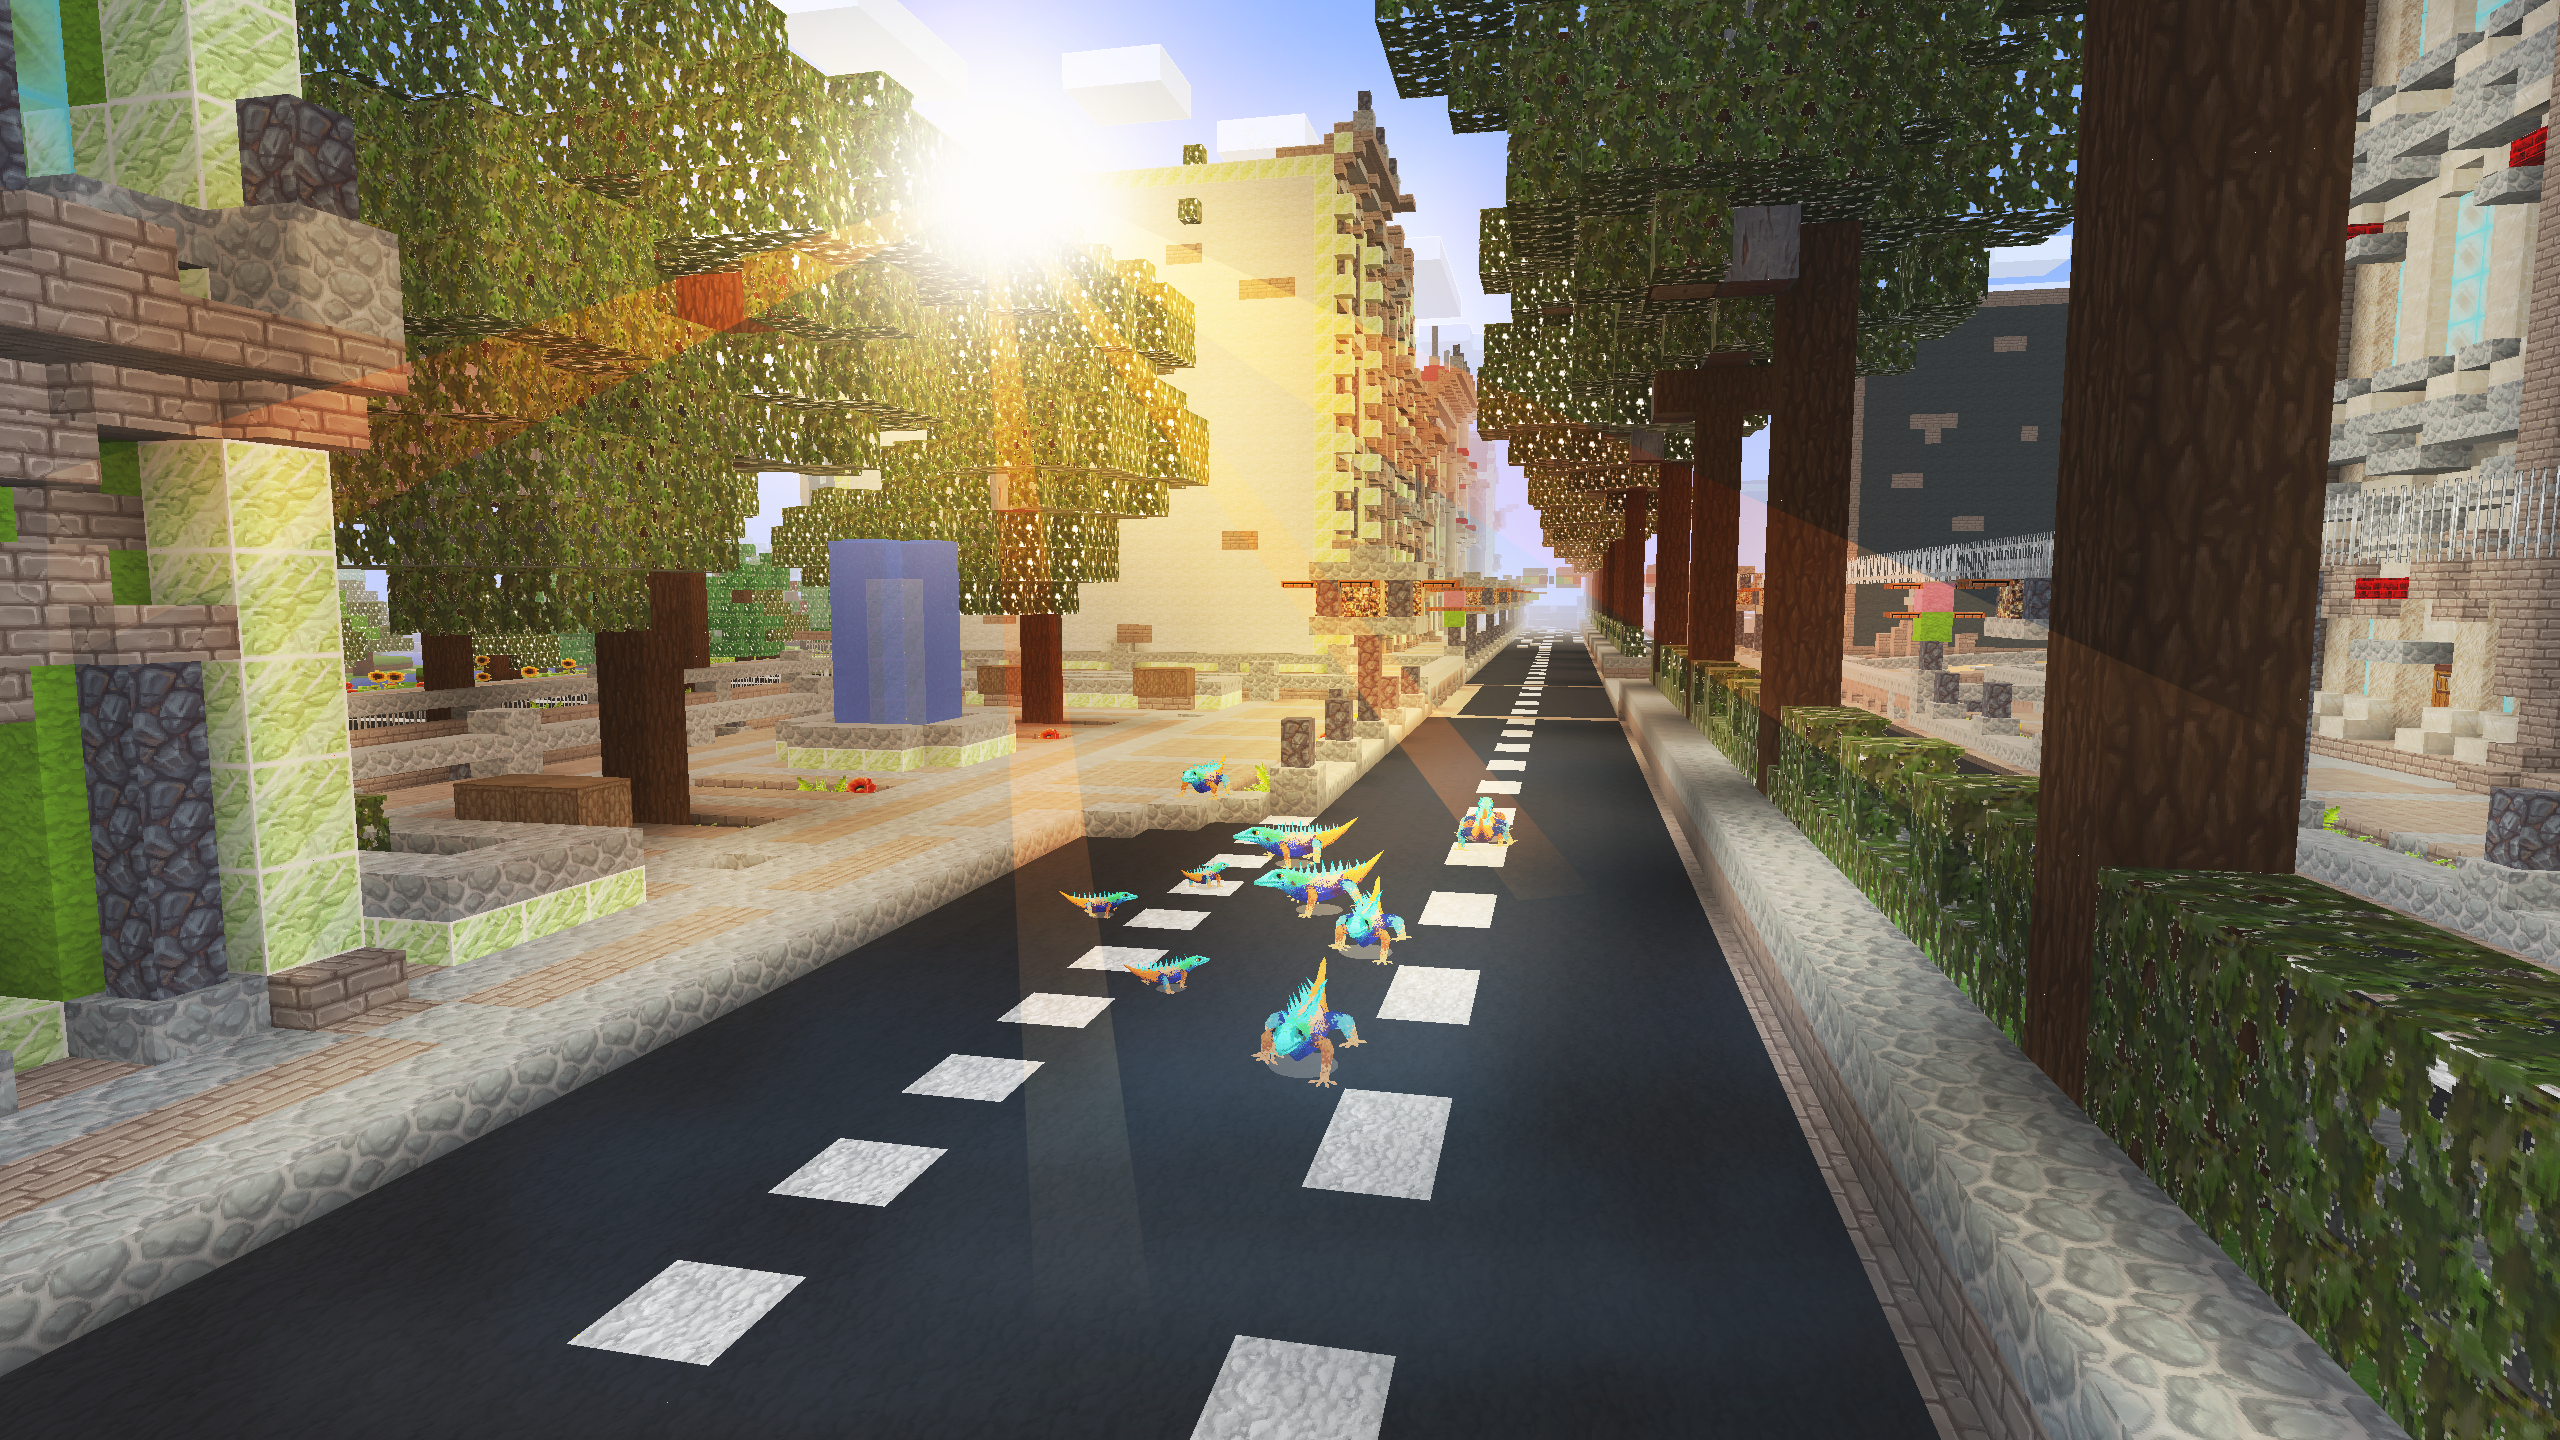 Minecraft Video Game Art Video Game Landscape Video Games Games Posters 2560x1440